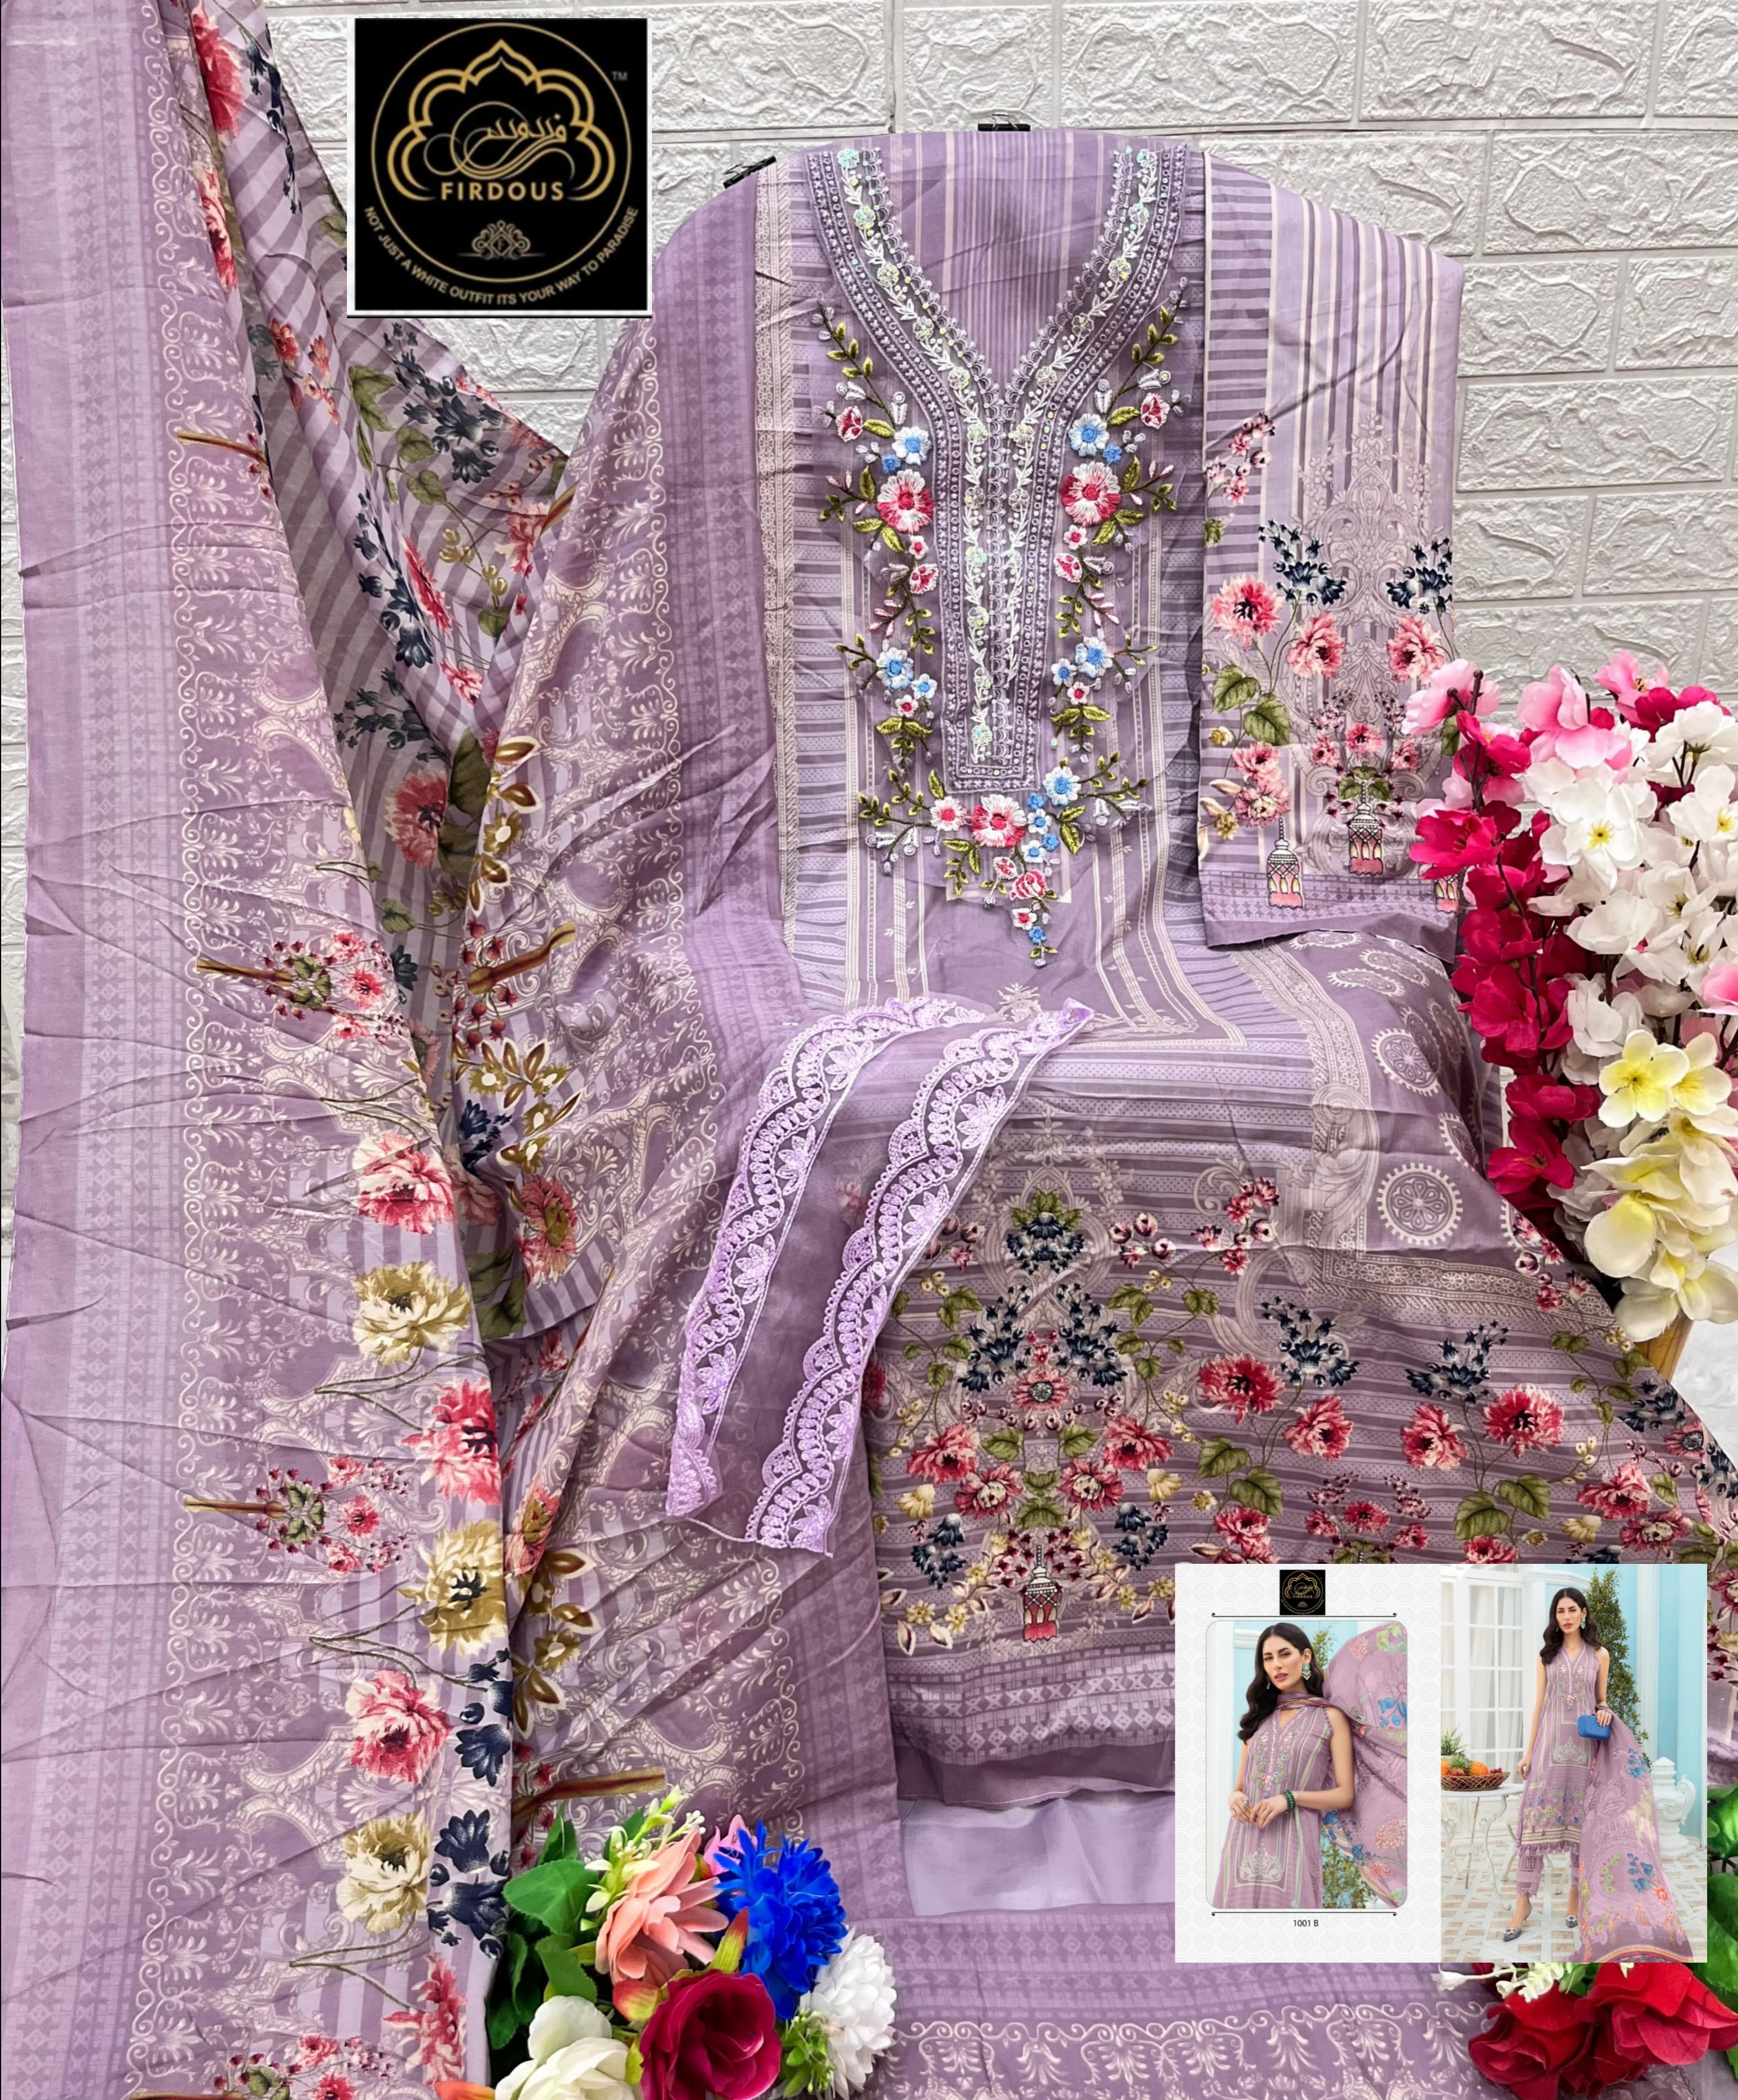 Firdous Maria.B. Vol 1 Cotton Printed With Embroidery Work Chiffon Dupatta Pakistani Suits Online In India - jilaniwholesalesuit